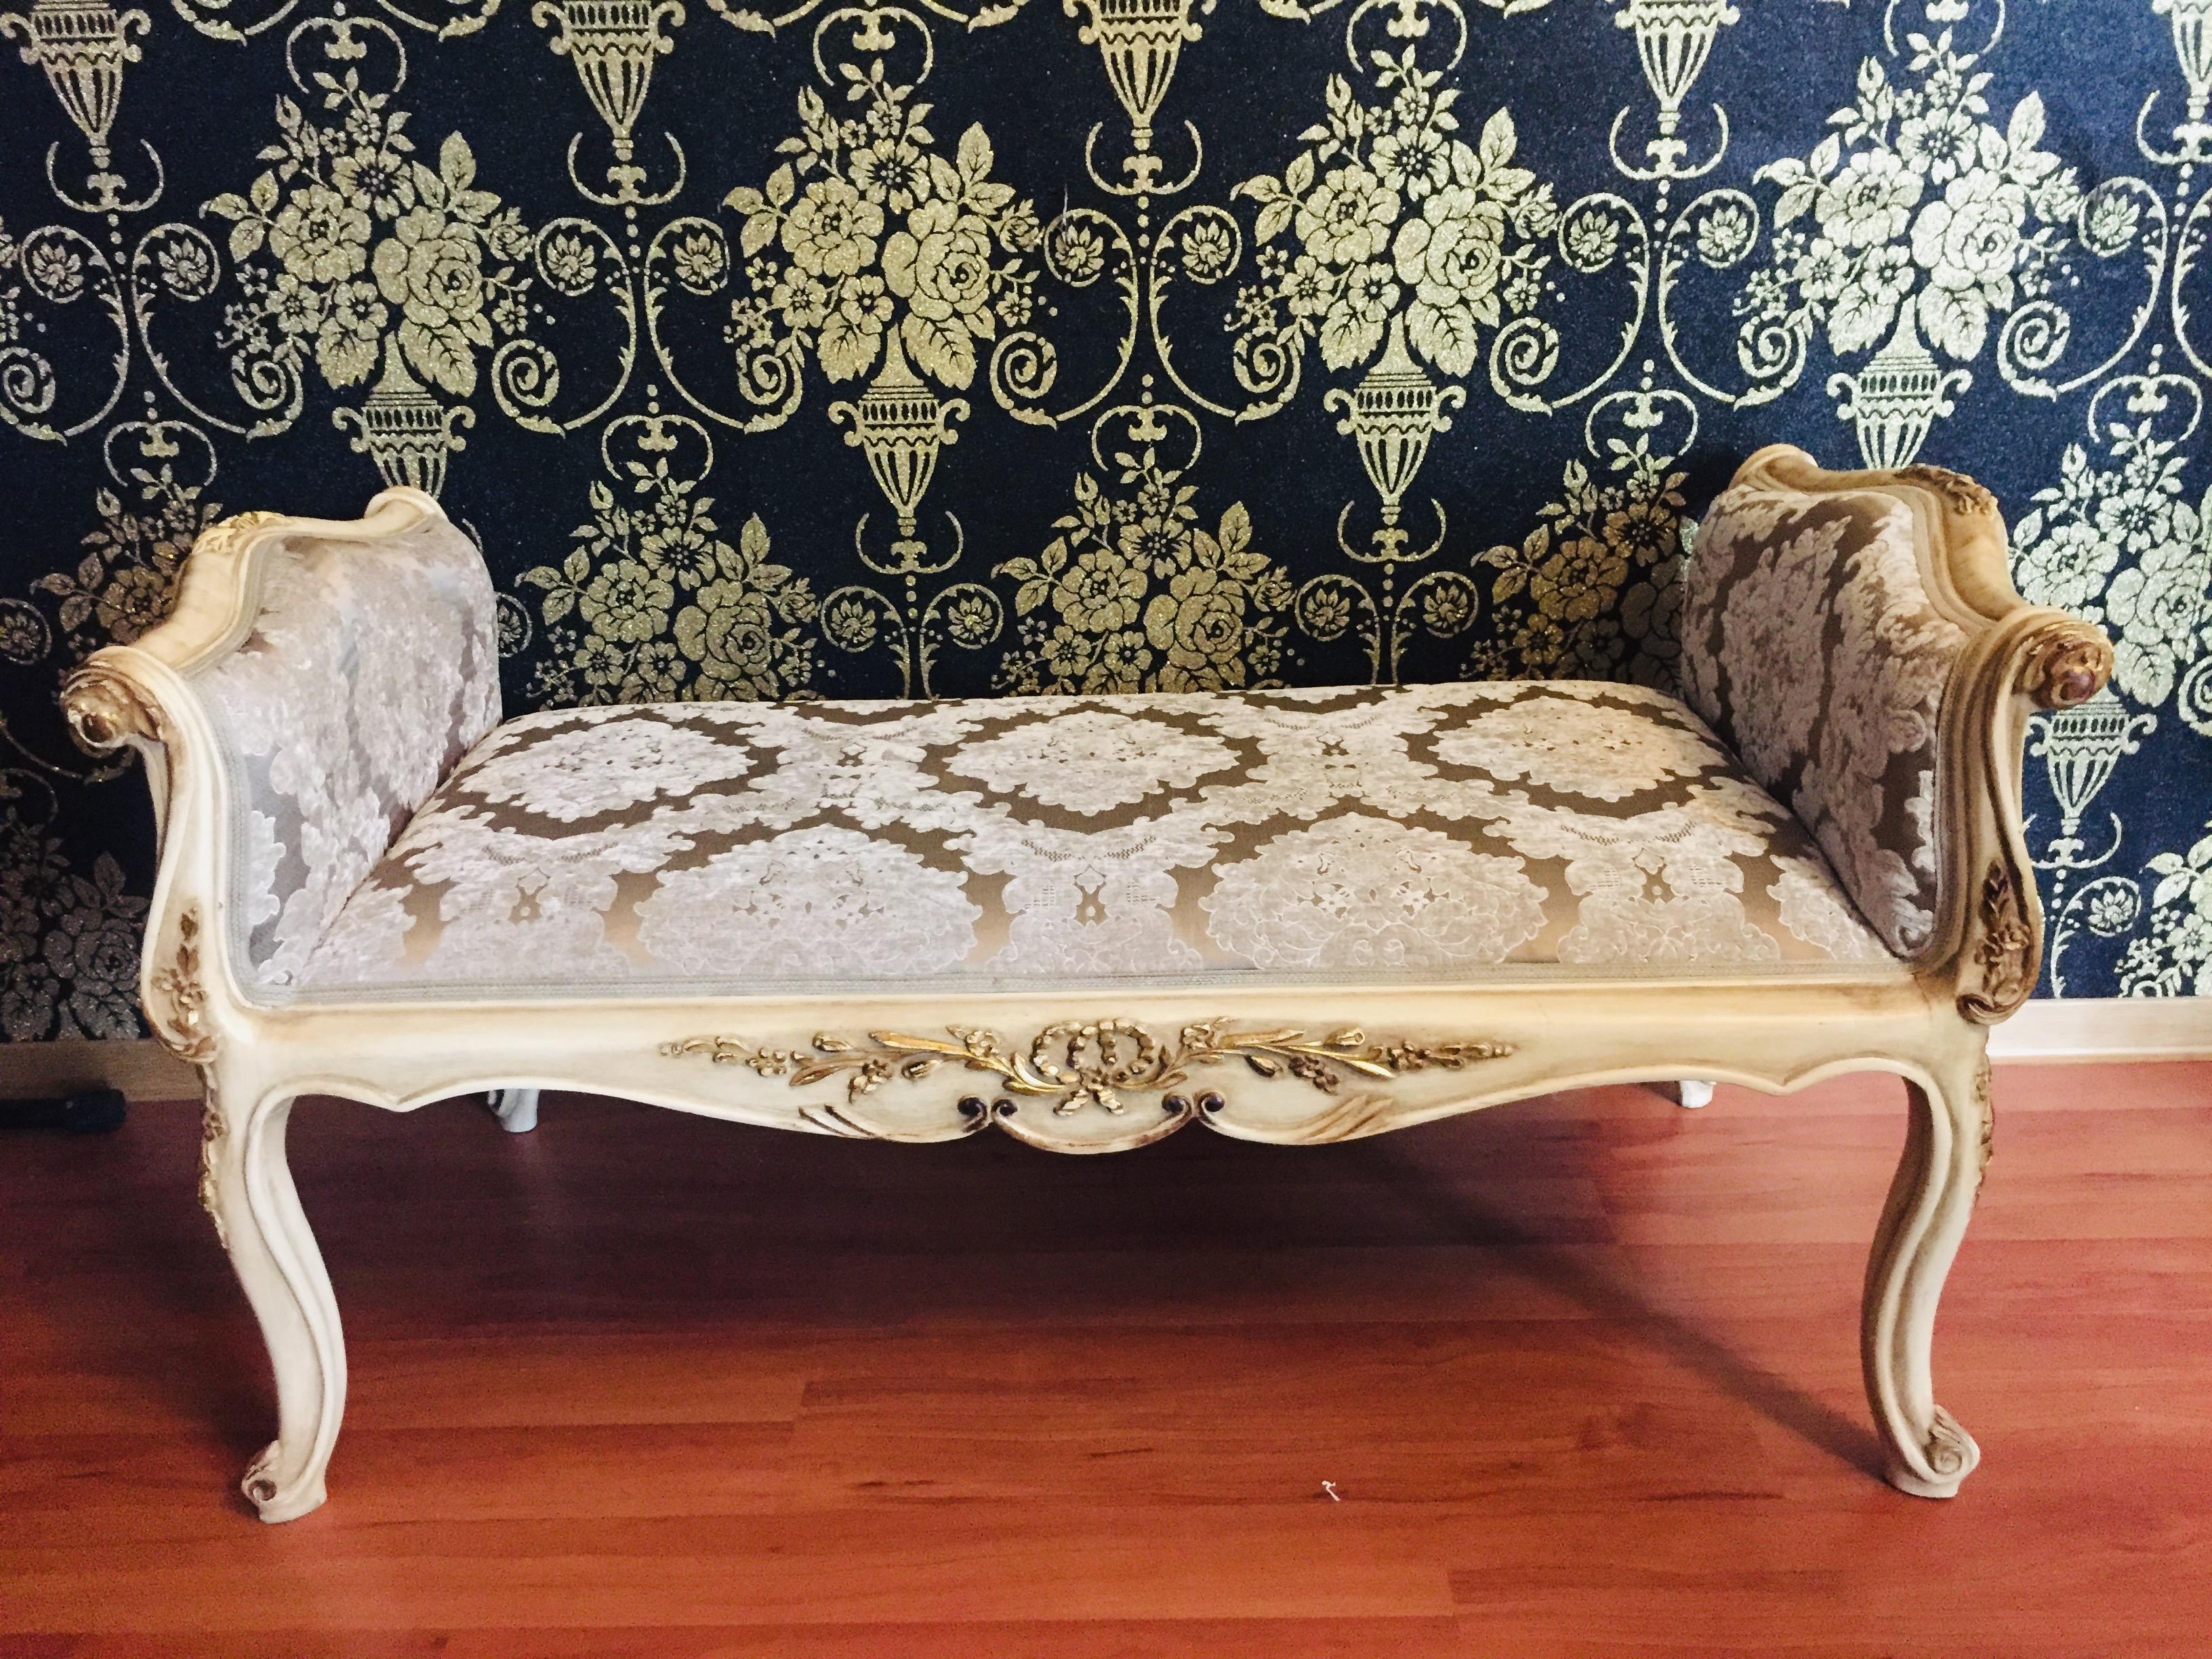 Solid beechwood, gilded with gold-plated trim, snug curly frame on four curved legs. The seat is finished with a historical, classic upholstery.